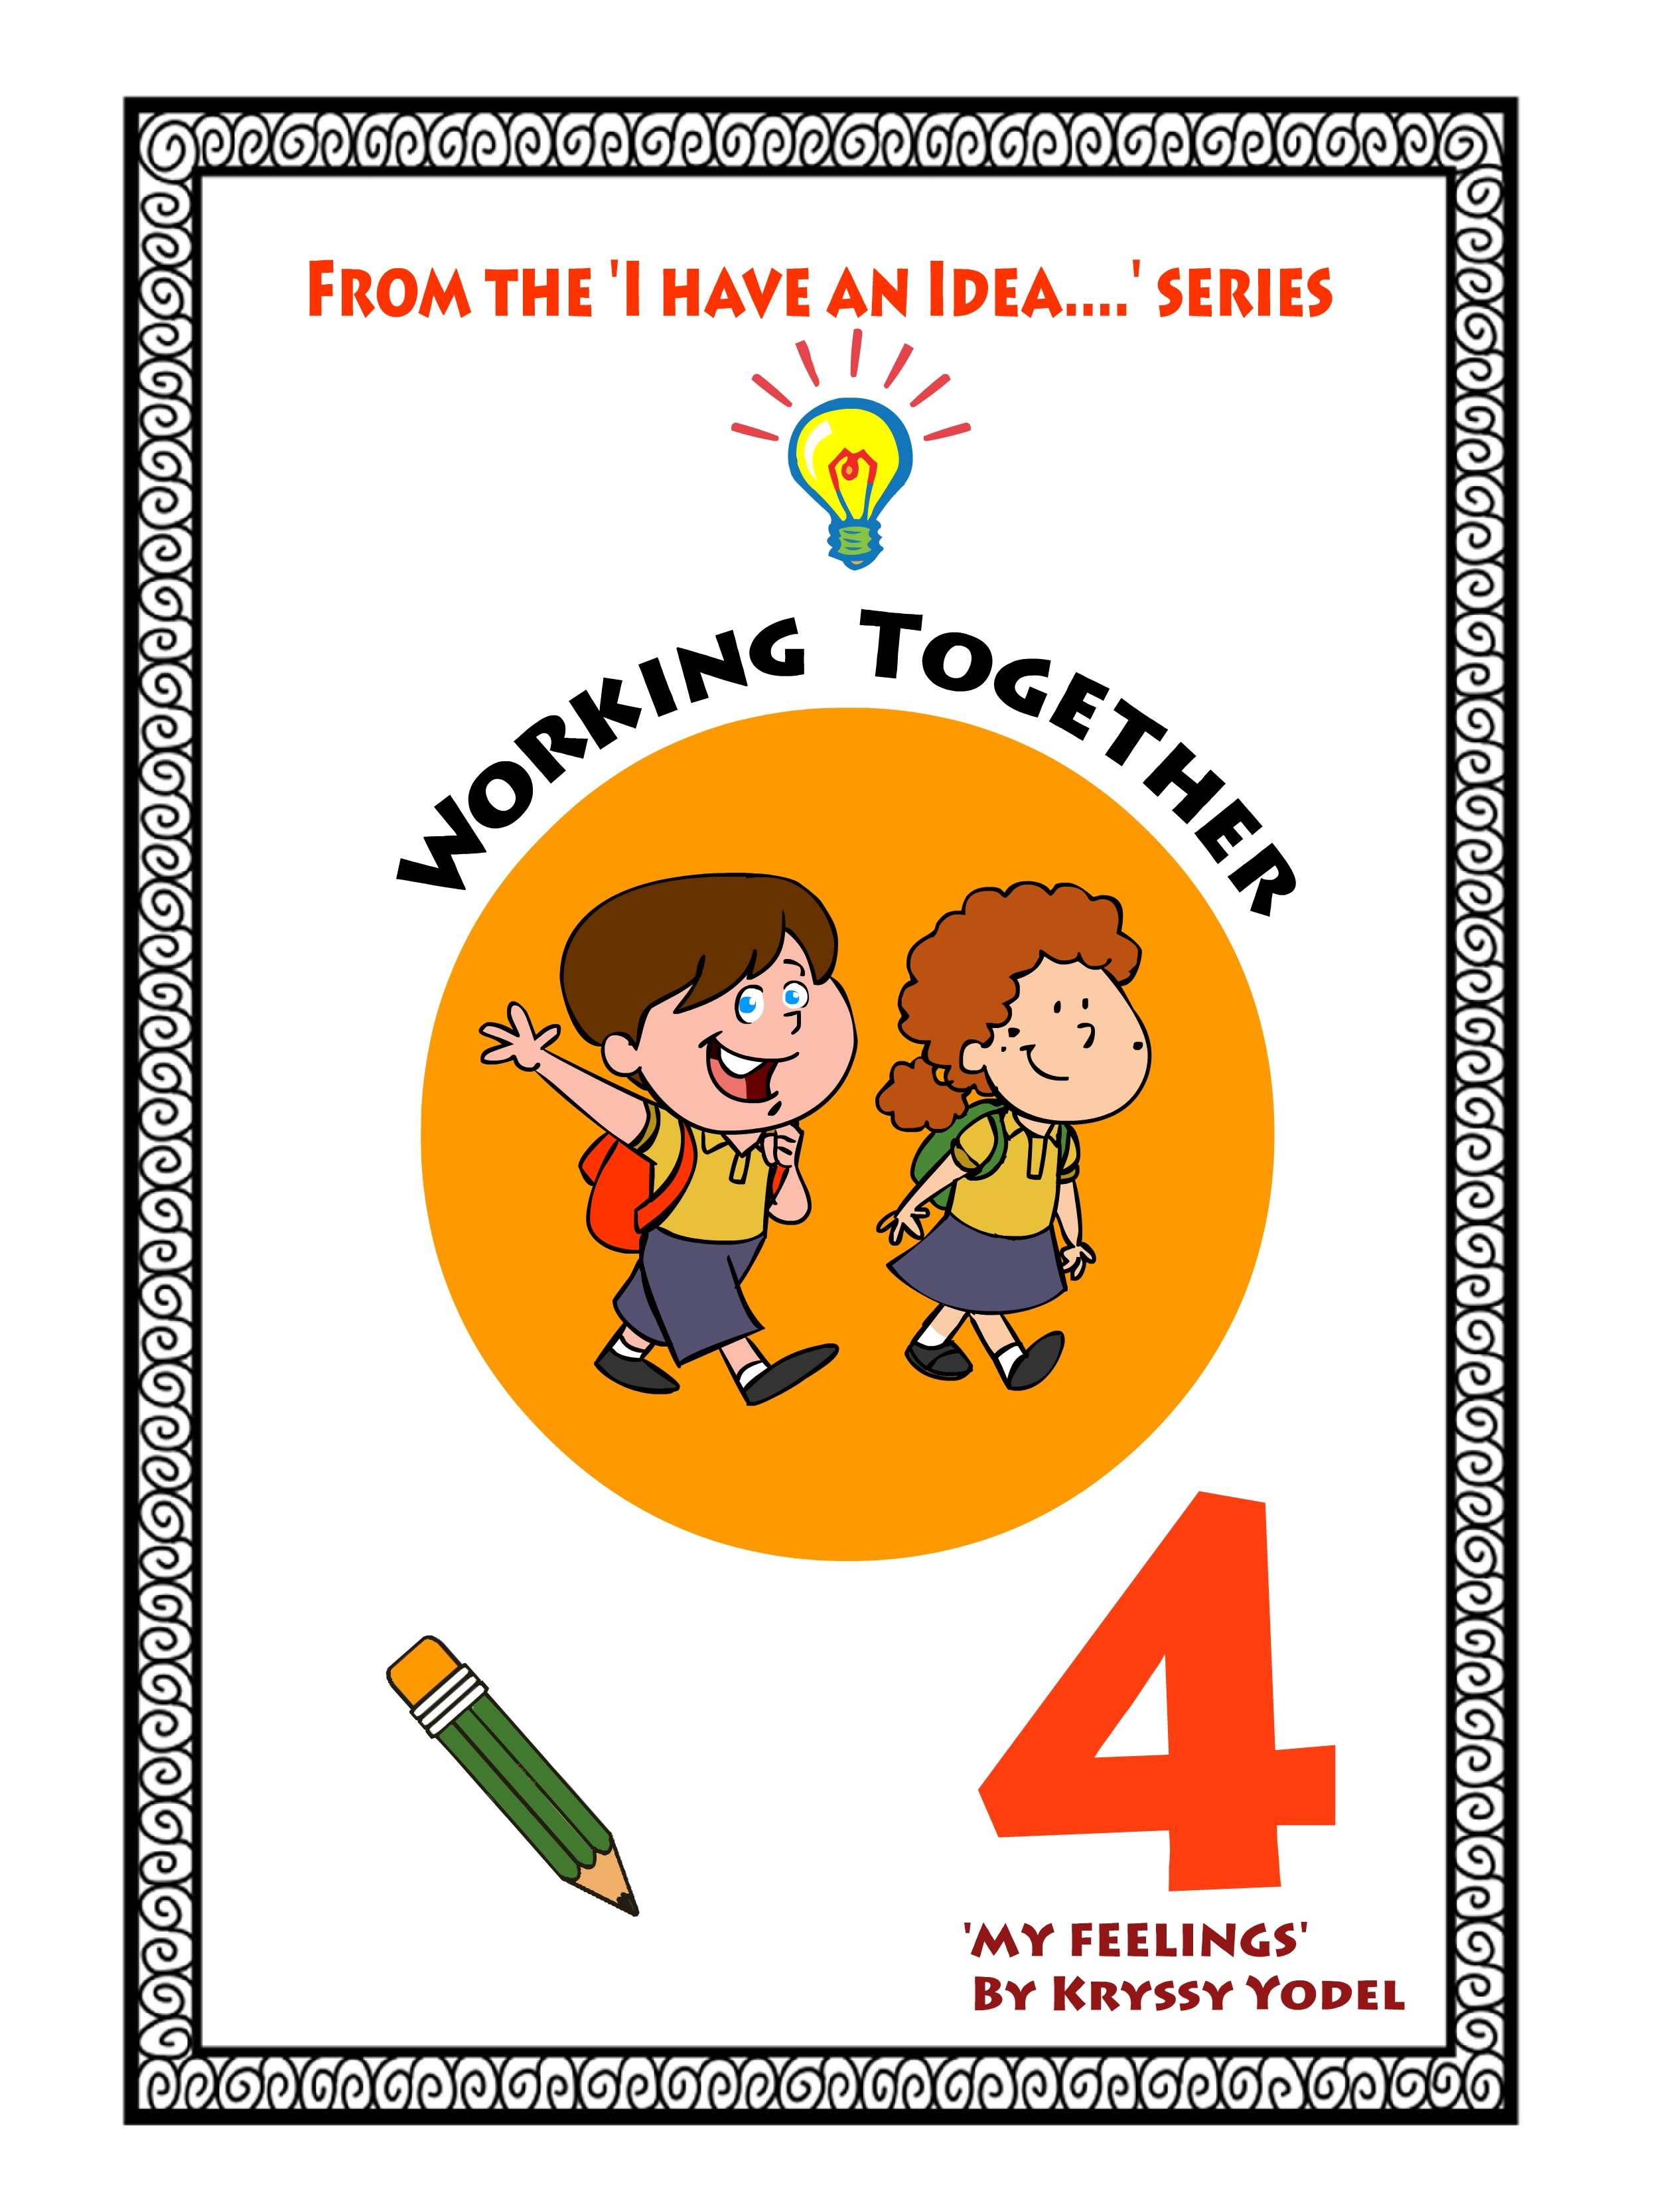 Working Together - Number 4 from 'My Feelings'